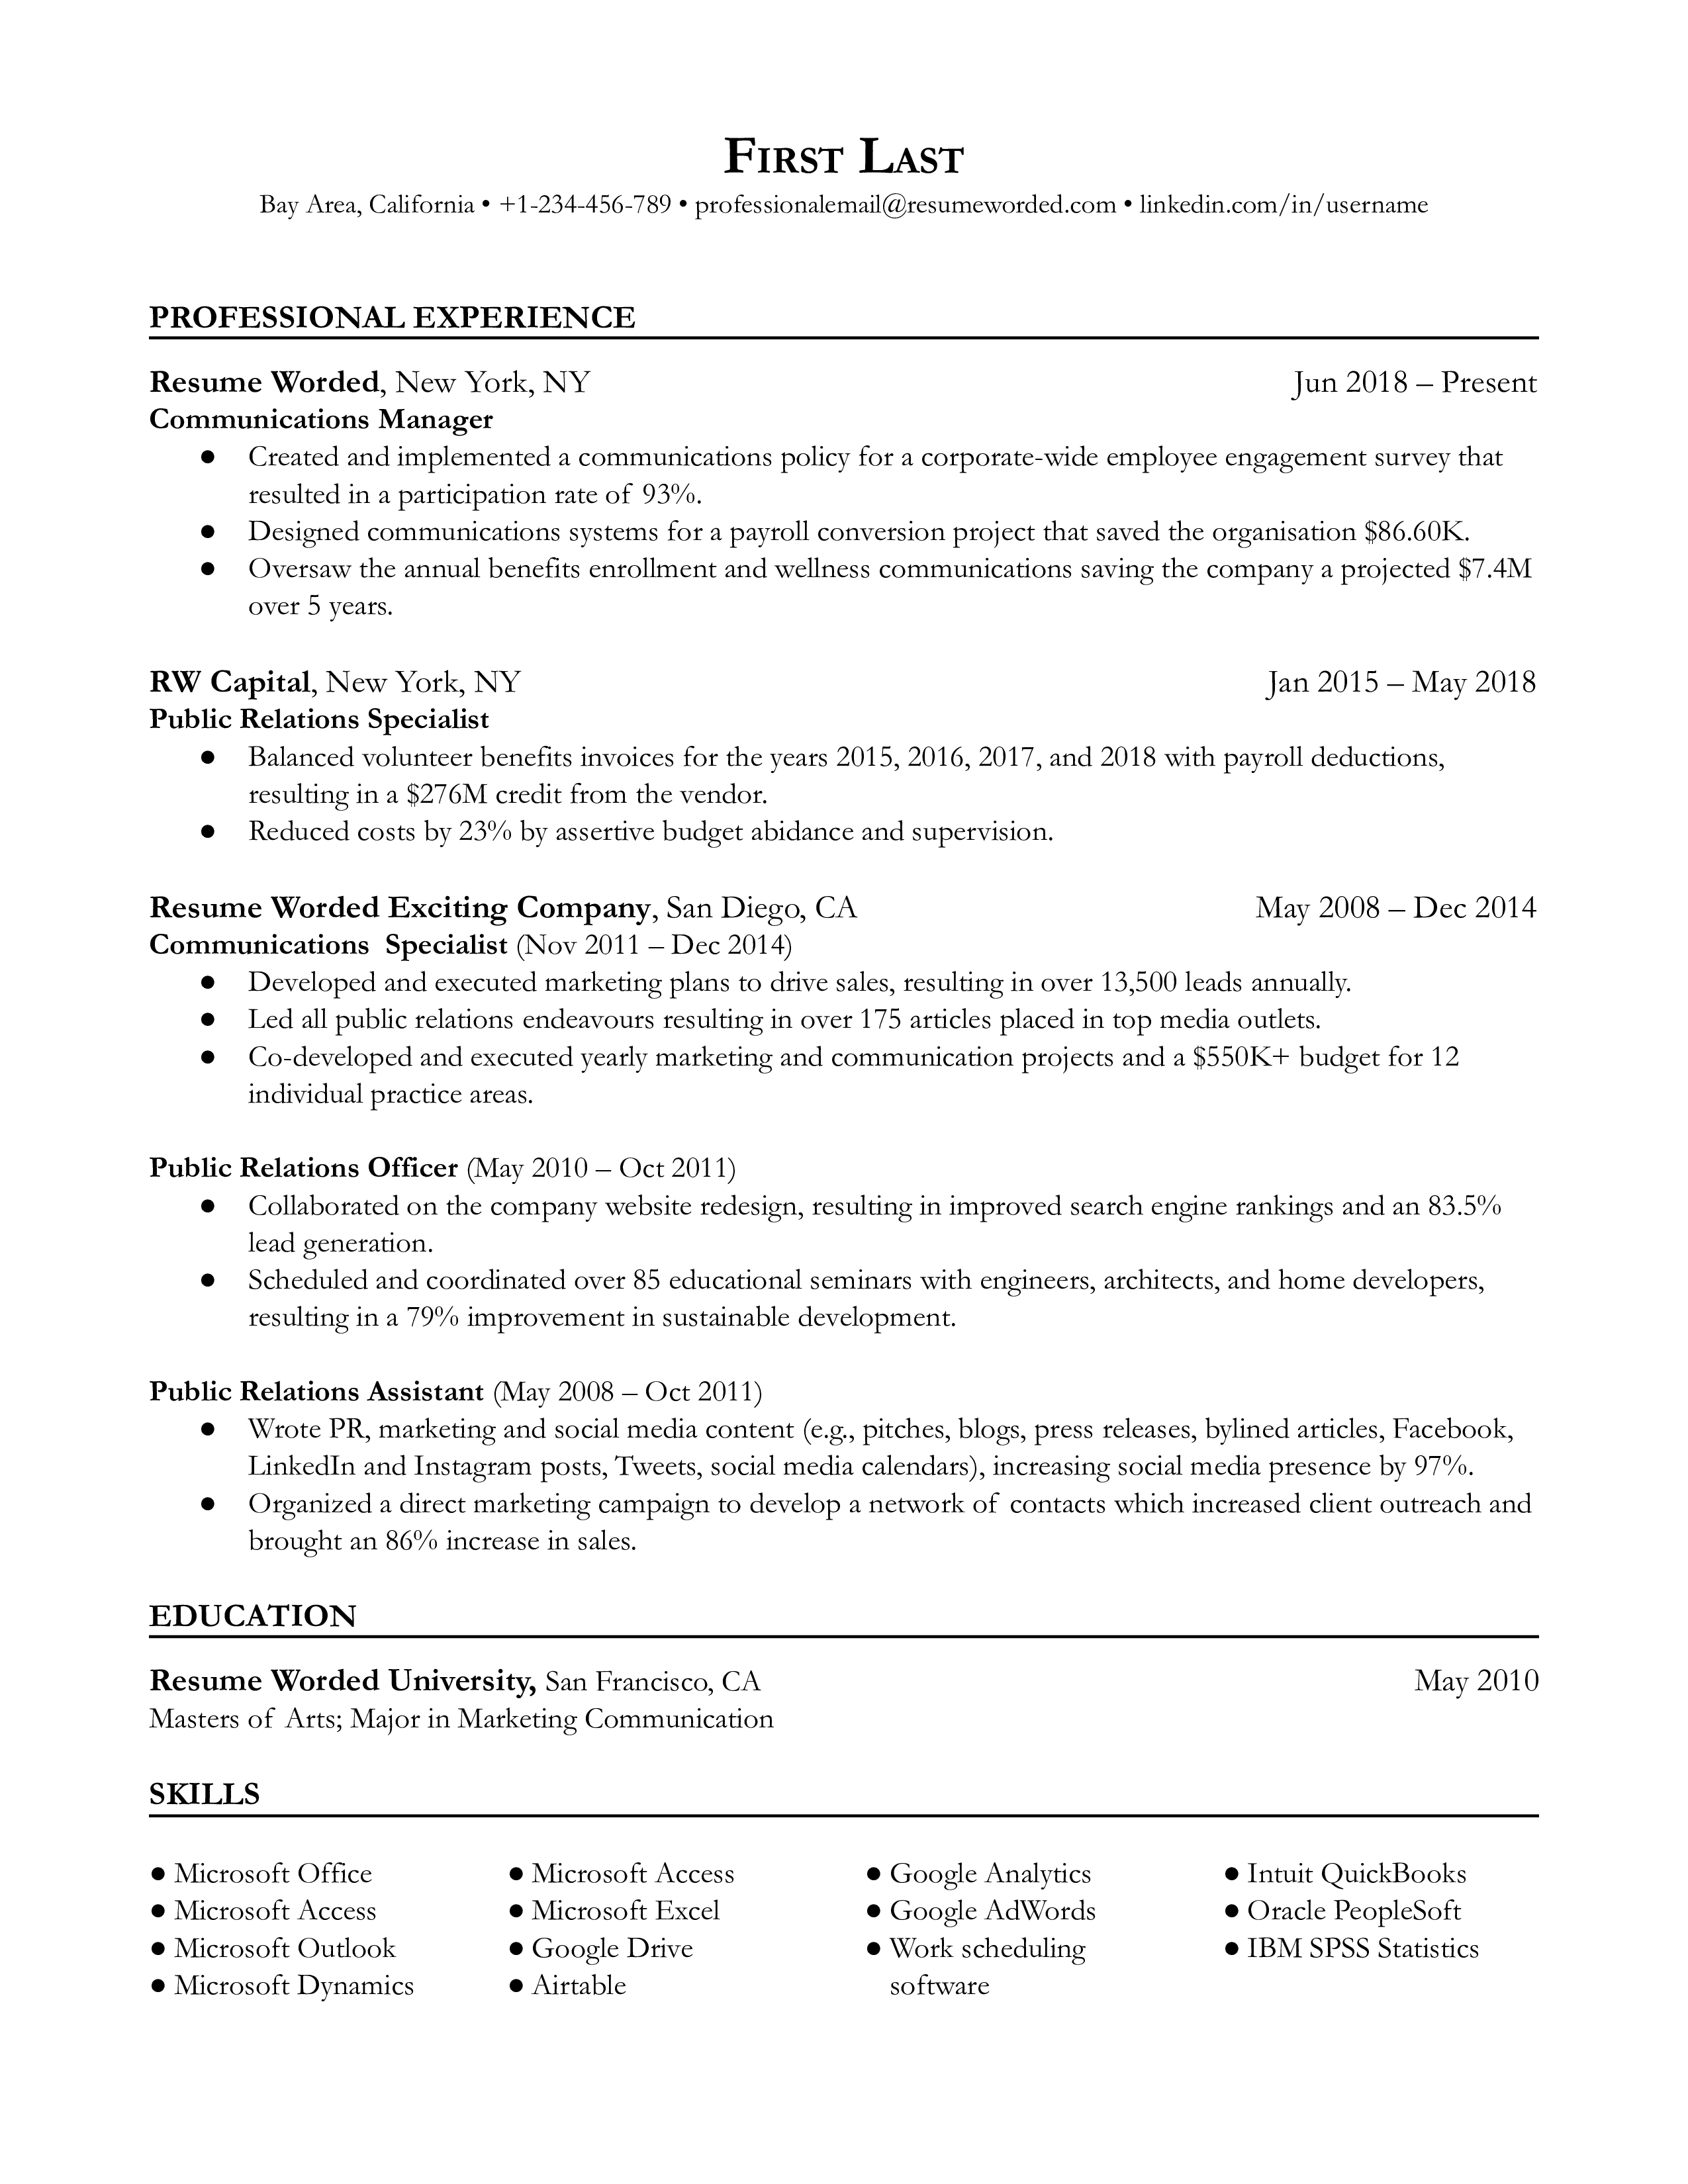 A communications manager resume that highlights the skills and required experience to manage a company’s communications